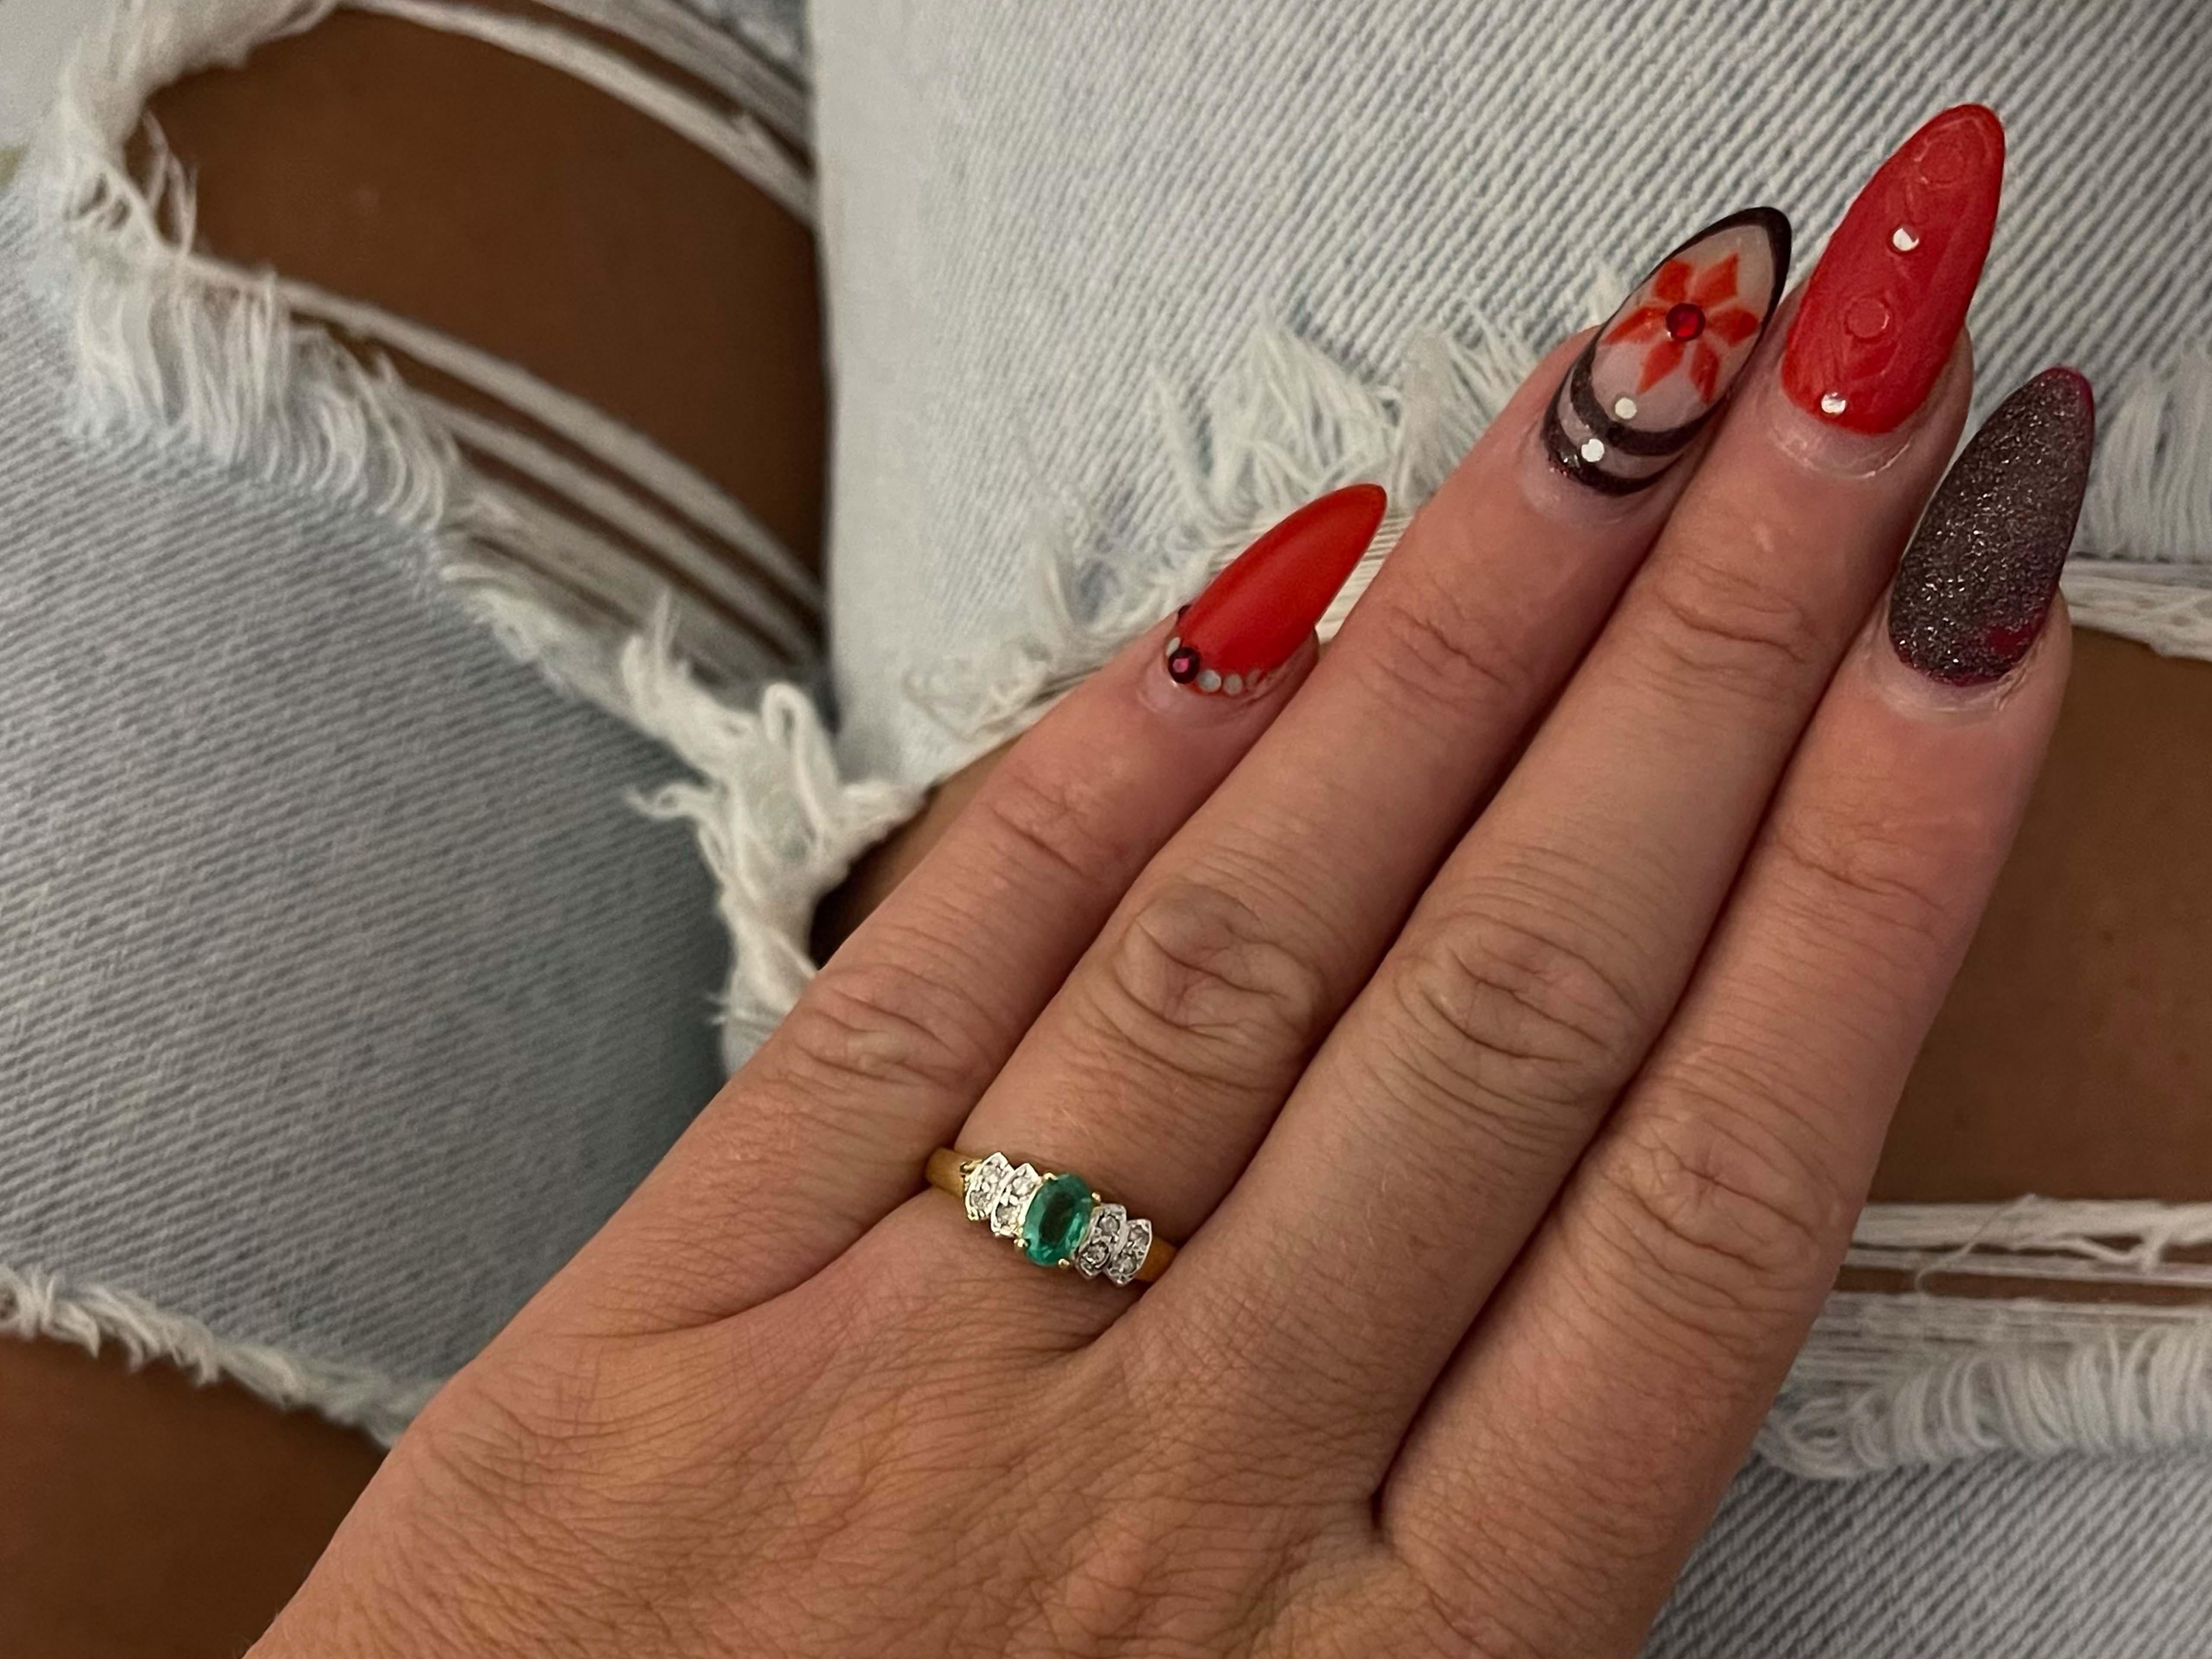 Item Specifications:

Metal: 14K Yellow Gold

Style: Statement Ring

Ring Size: 6 (resizing available for a fee)

Total Weight: 2.1 Grams

Ring Height: 5.84 mm

Gemstone Specifications:

Gemstone: 1 Green Emerald

Shape: Oval

Emerald Measurements: